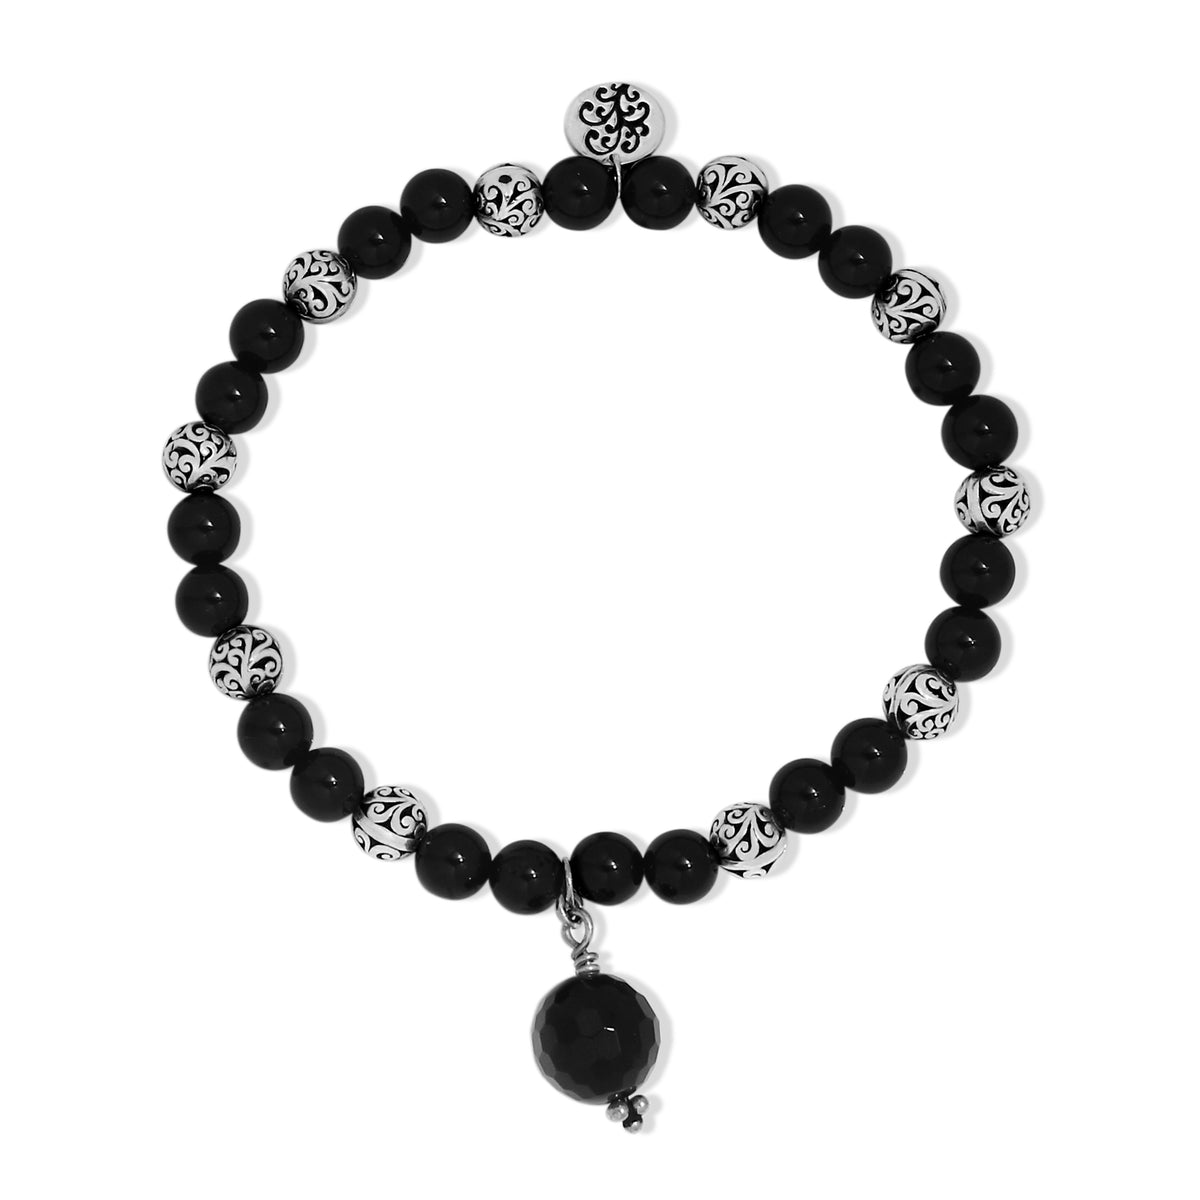 Black Onyx & Scroll Beads (6mm) with Faceted Black Onyx (10mm) Charm Stretch Bracelet